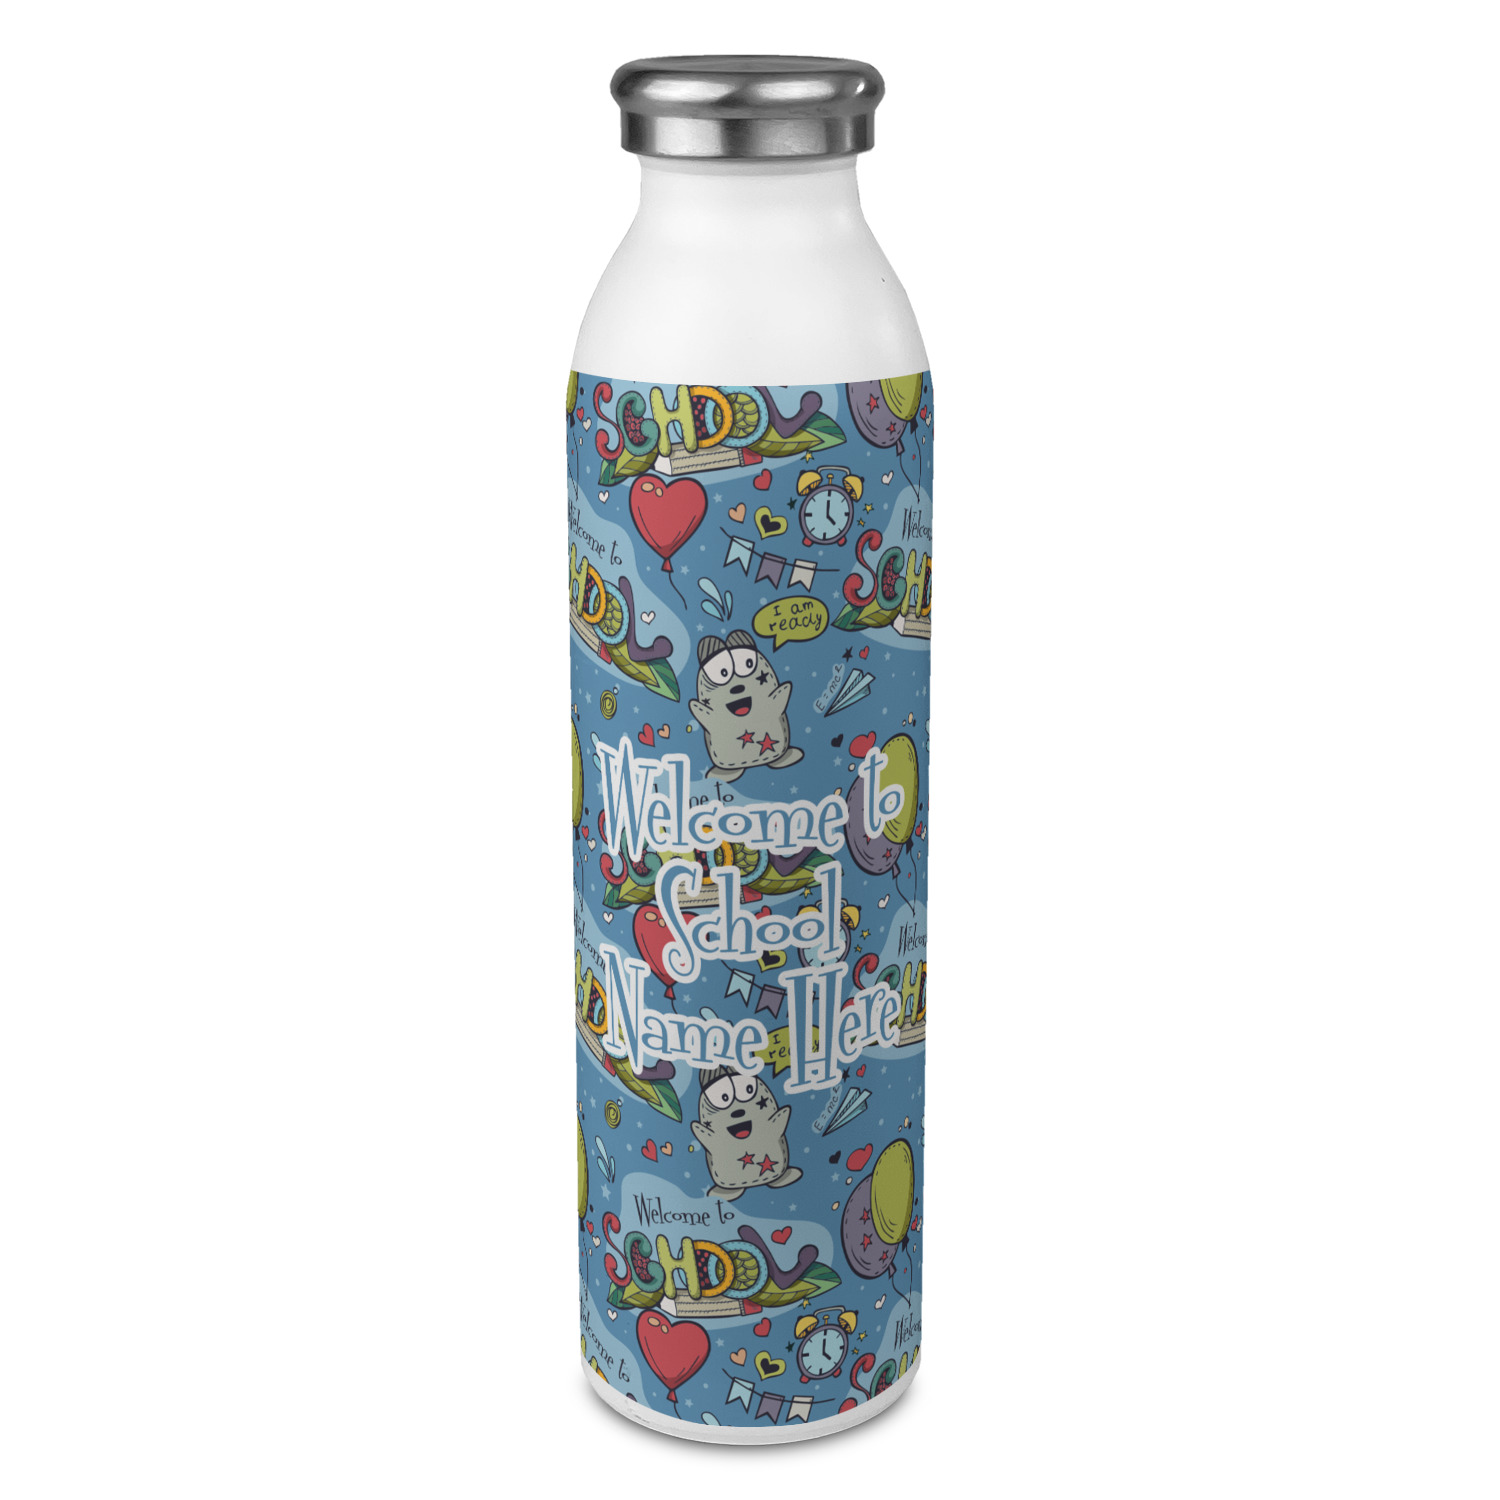 https://www.youcustomizeit.com/common/MAKE/2463811/Welcome-to-School-20oz-Water-Bottles-Full-Print-Front-Main.jpg?lm=1665527523